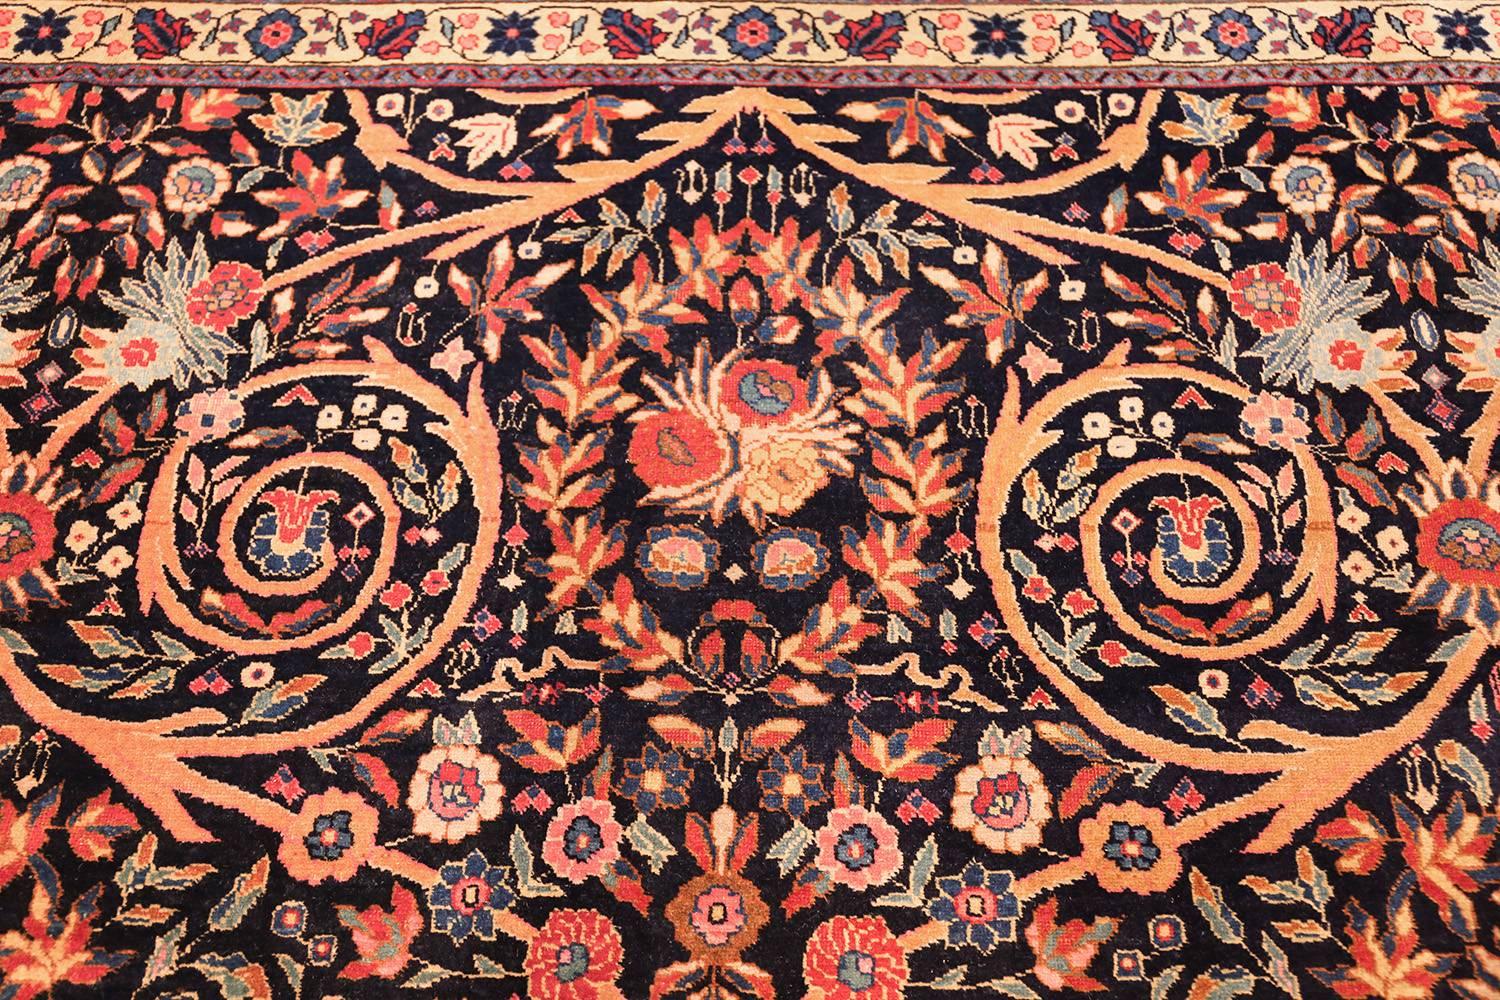 Beautiful Antique Persian Tabriz Carpet. Size: 11 ft x 14 ft 3 in 1